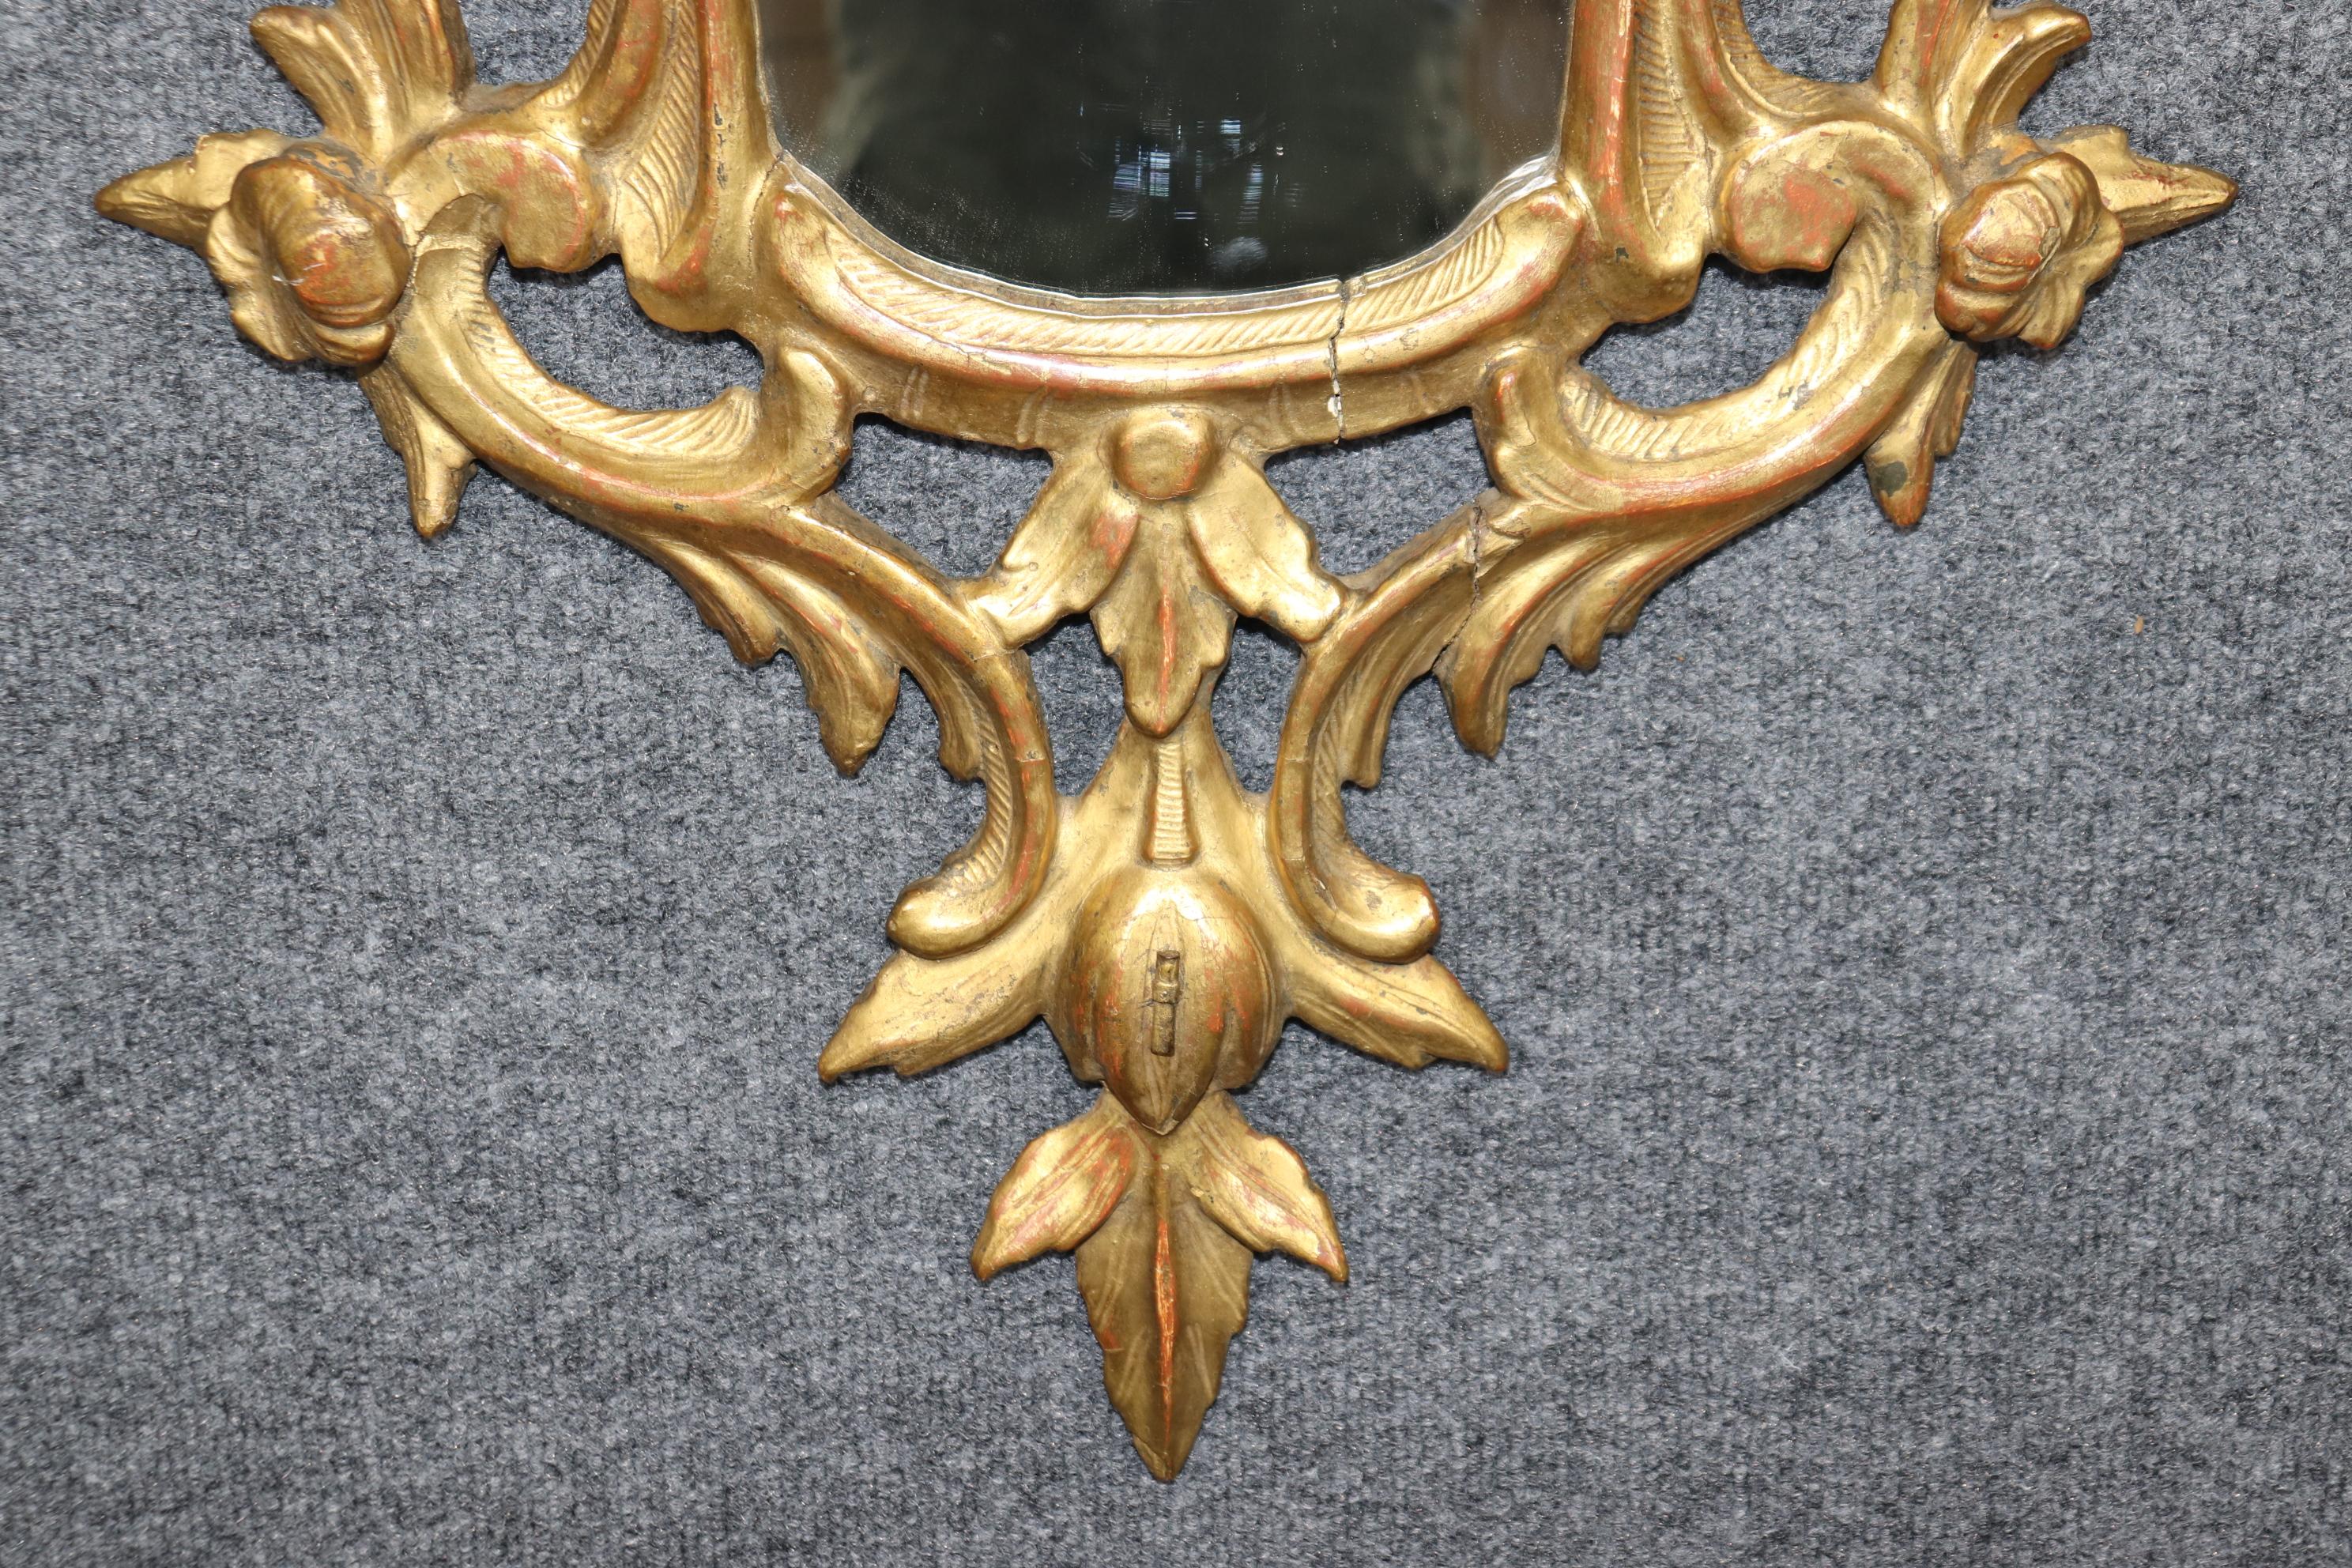 Beech Fantastic Diminutive Water Gilded Carved Italian Rococo Mirrors Circa 1820s For Sale